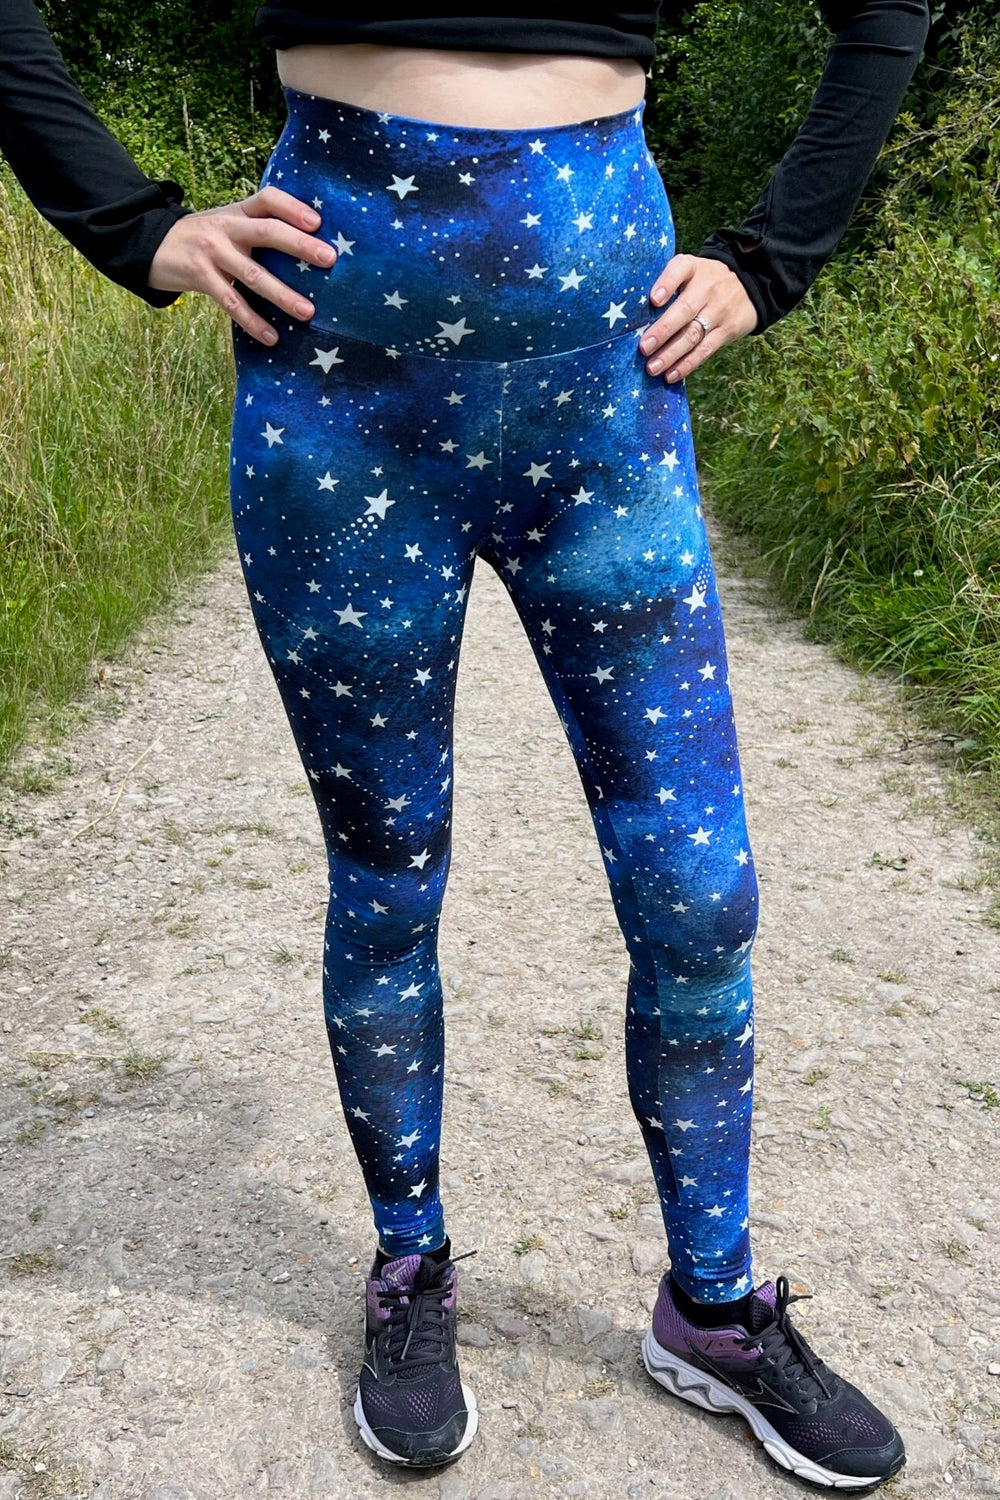 Woman wearing the Jupiter Leggings sewing pattern from Waves & Wild on The Fold Line. A leggings pattern made in 4-way stretch knit fabrics, featuring a full-length leg, curvy fit, side leg phone pocket, colour blocking options, and wide elasticated waist